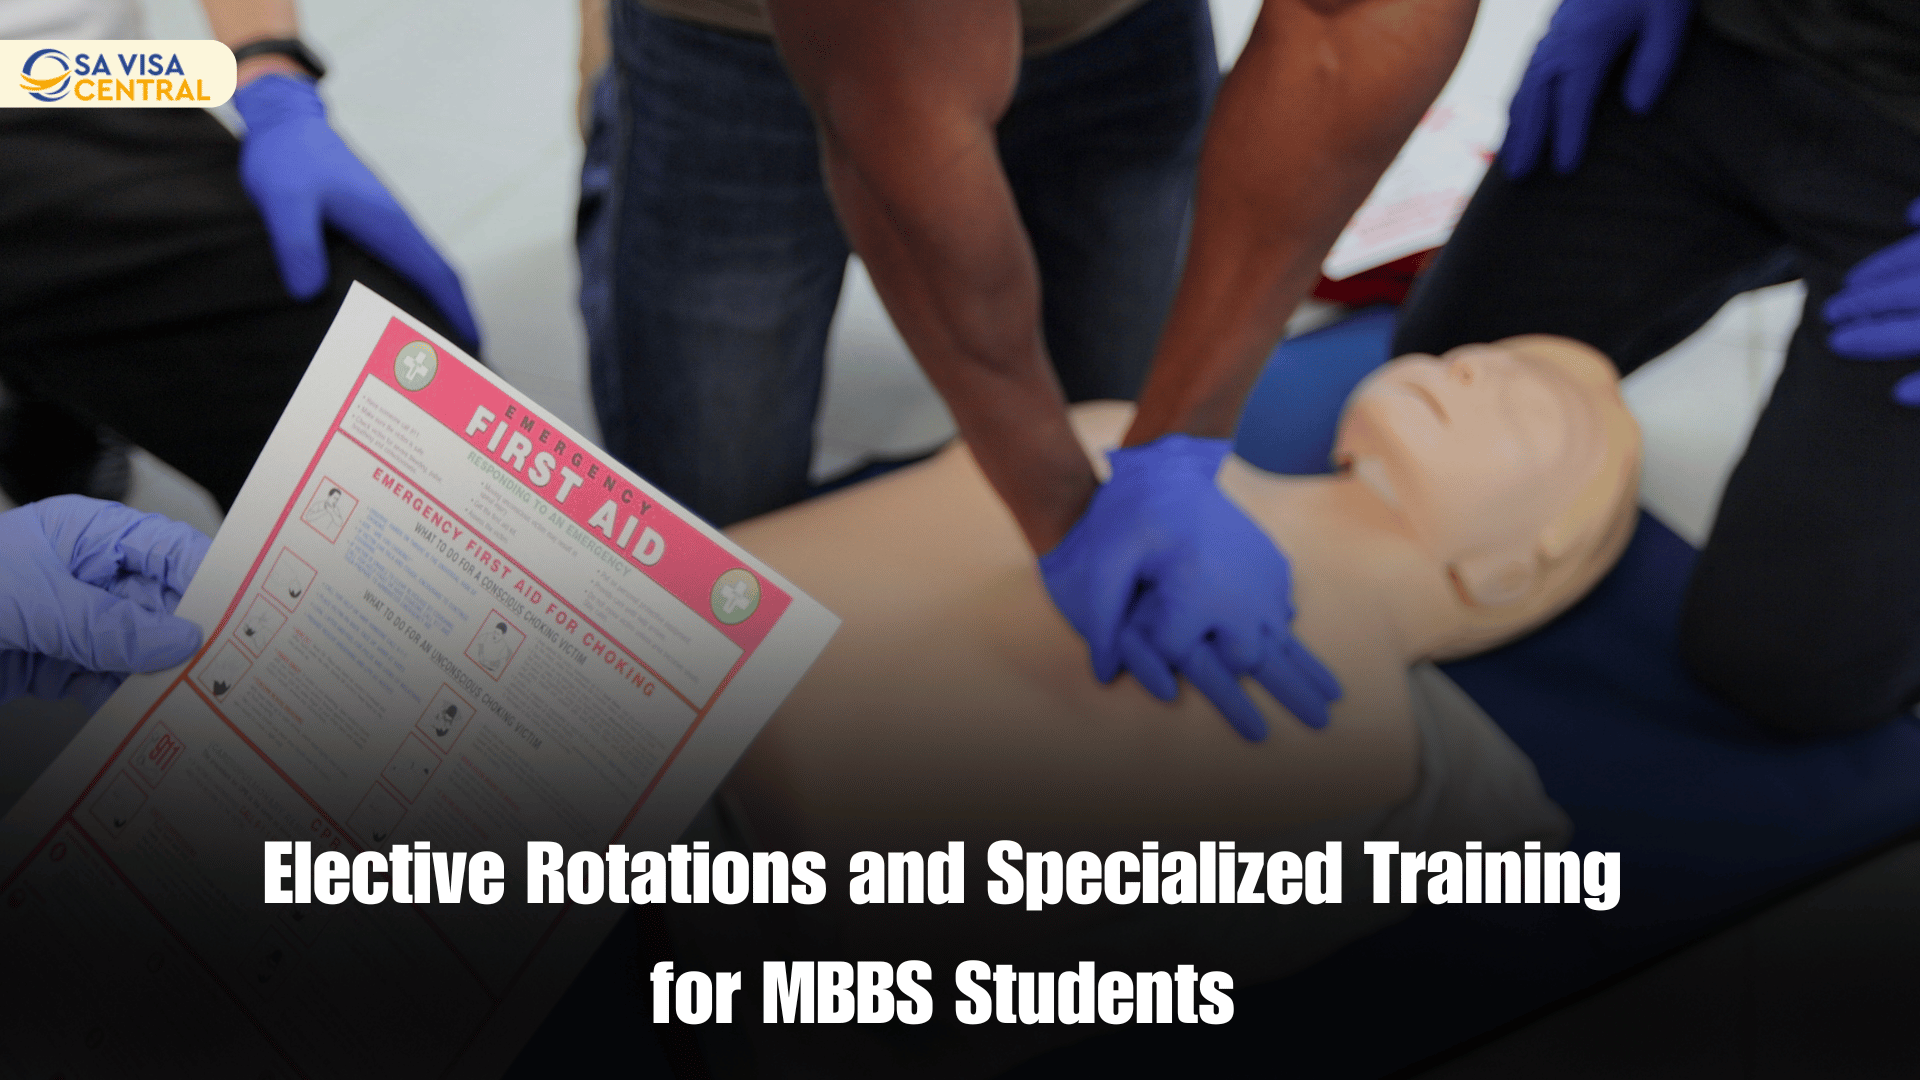 Elective Rotations and Specialized Training for MBBS Students